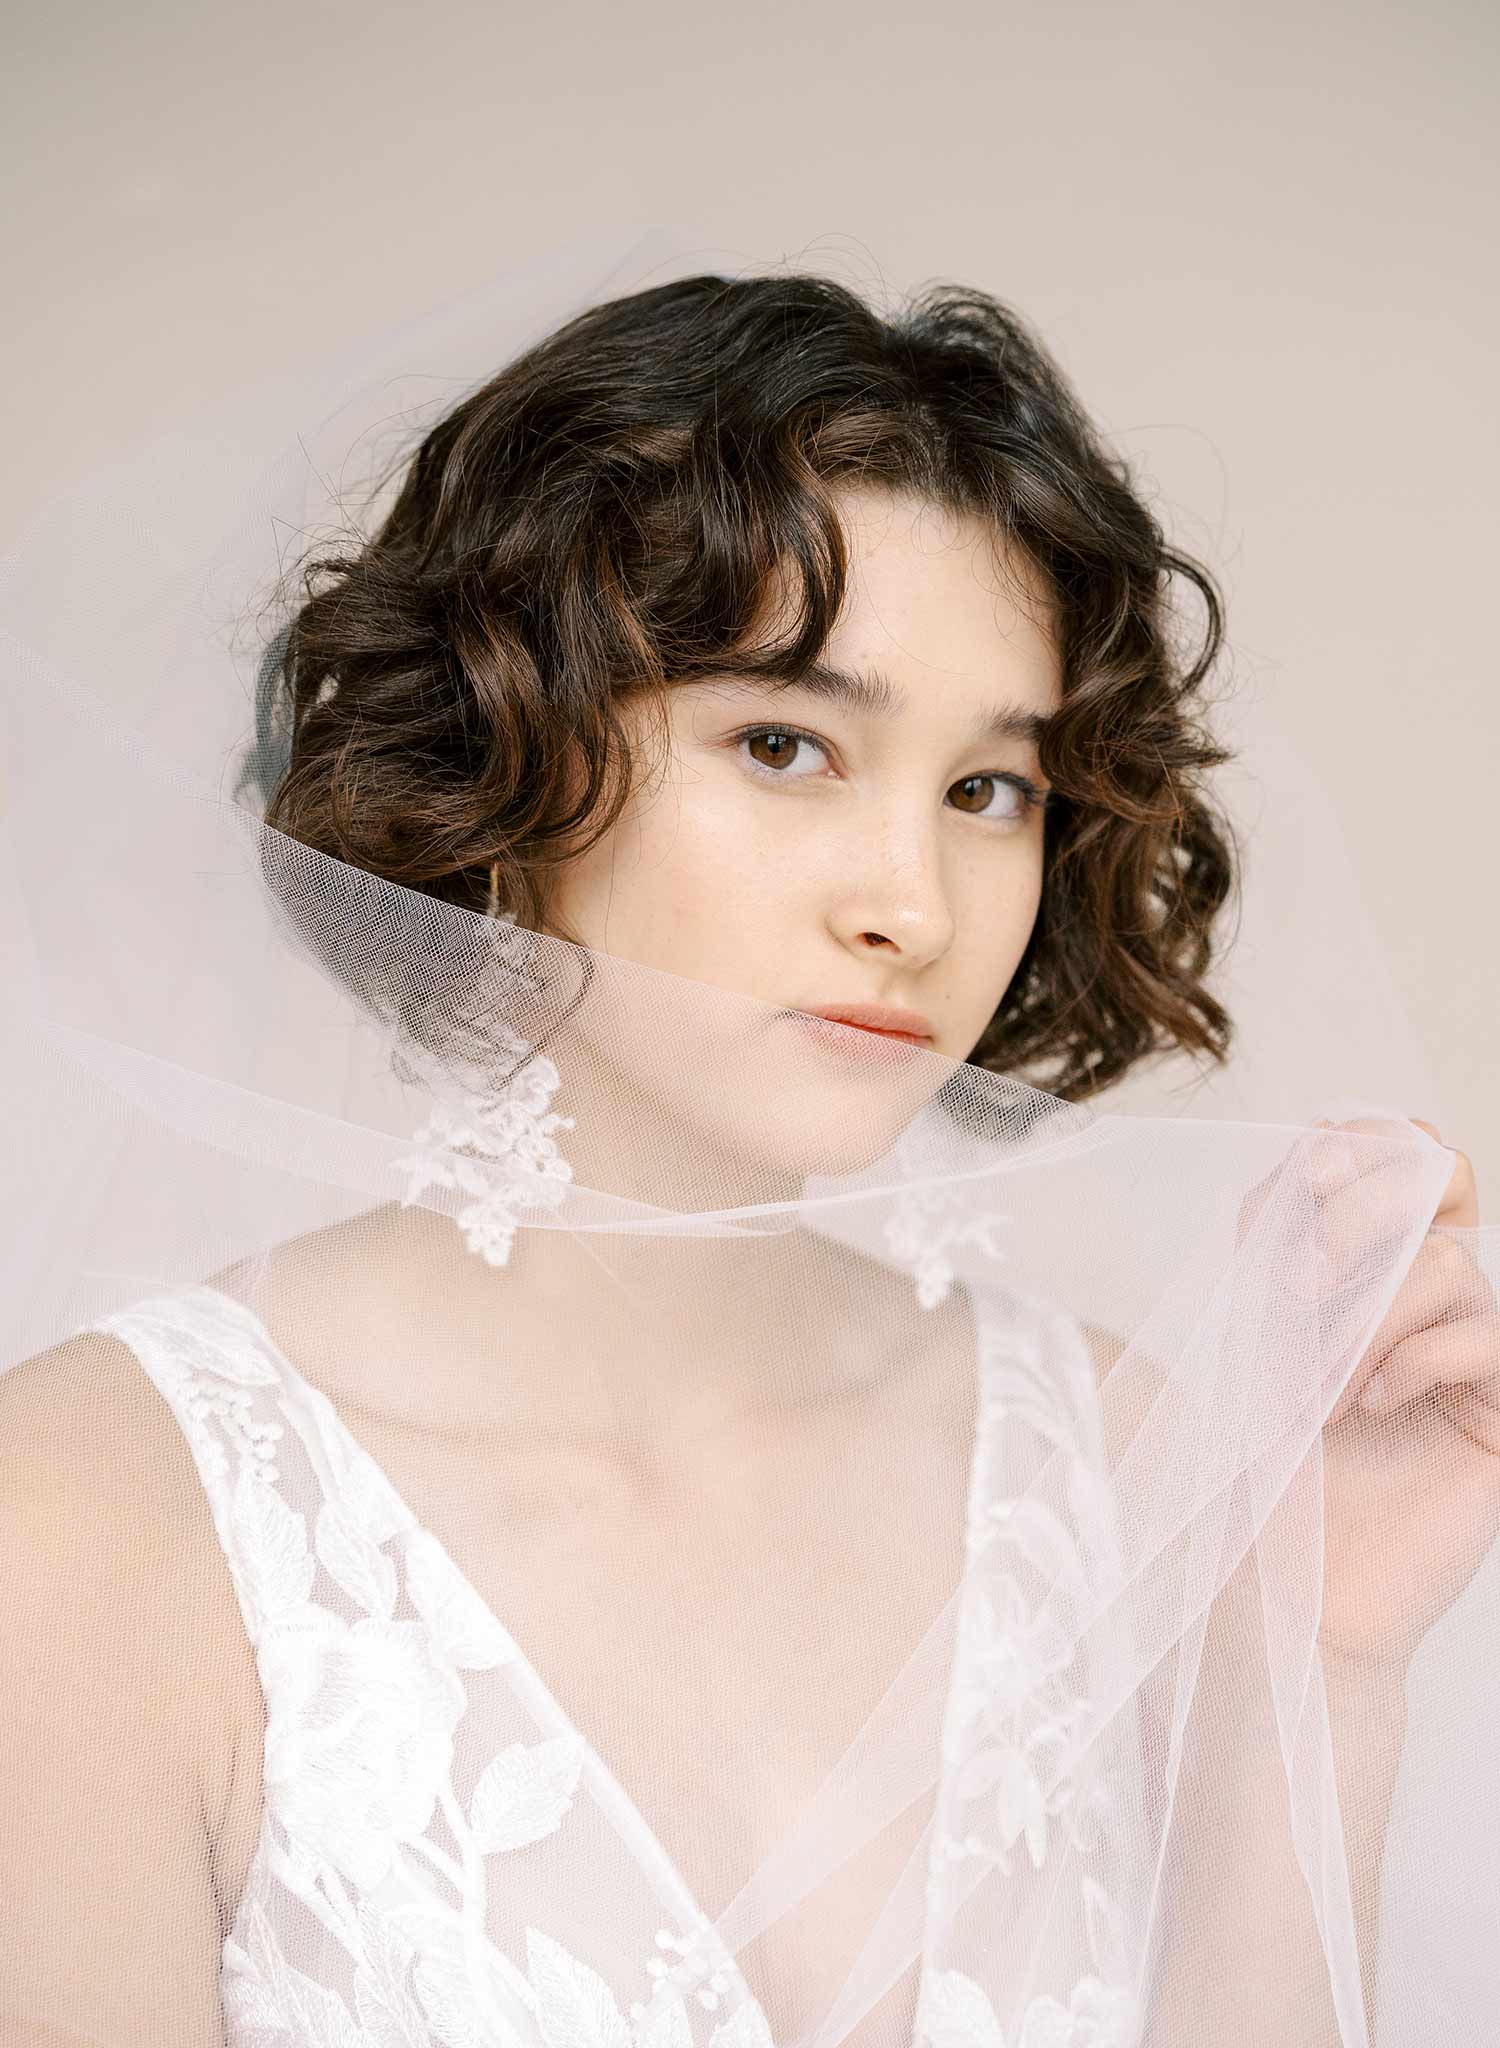 Twigs & Honey Bridal Short Veil with Blusher and Pencil Edge - Merrow Edge Bridal Veil with Blusher - Style #2358